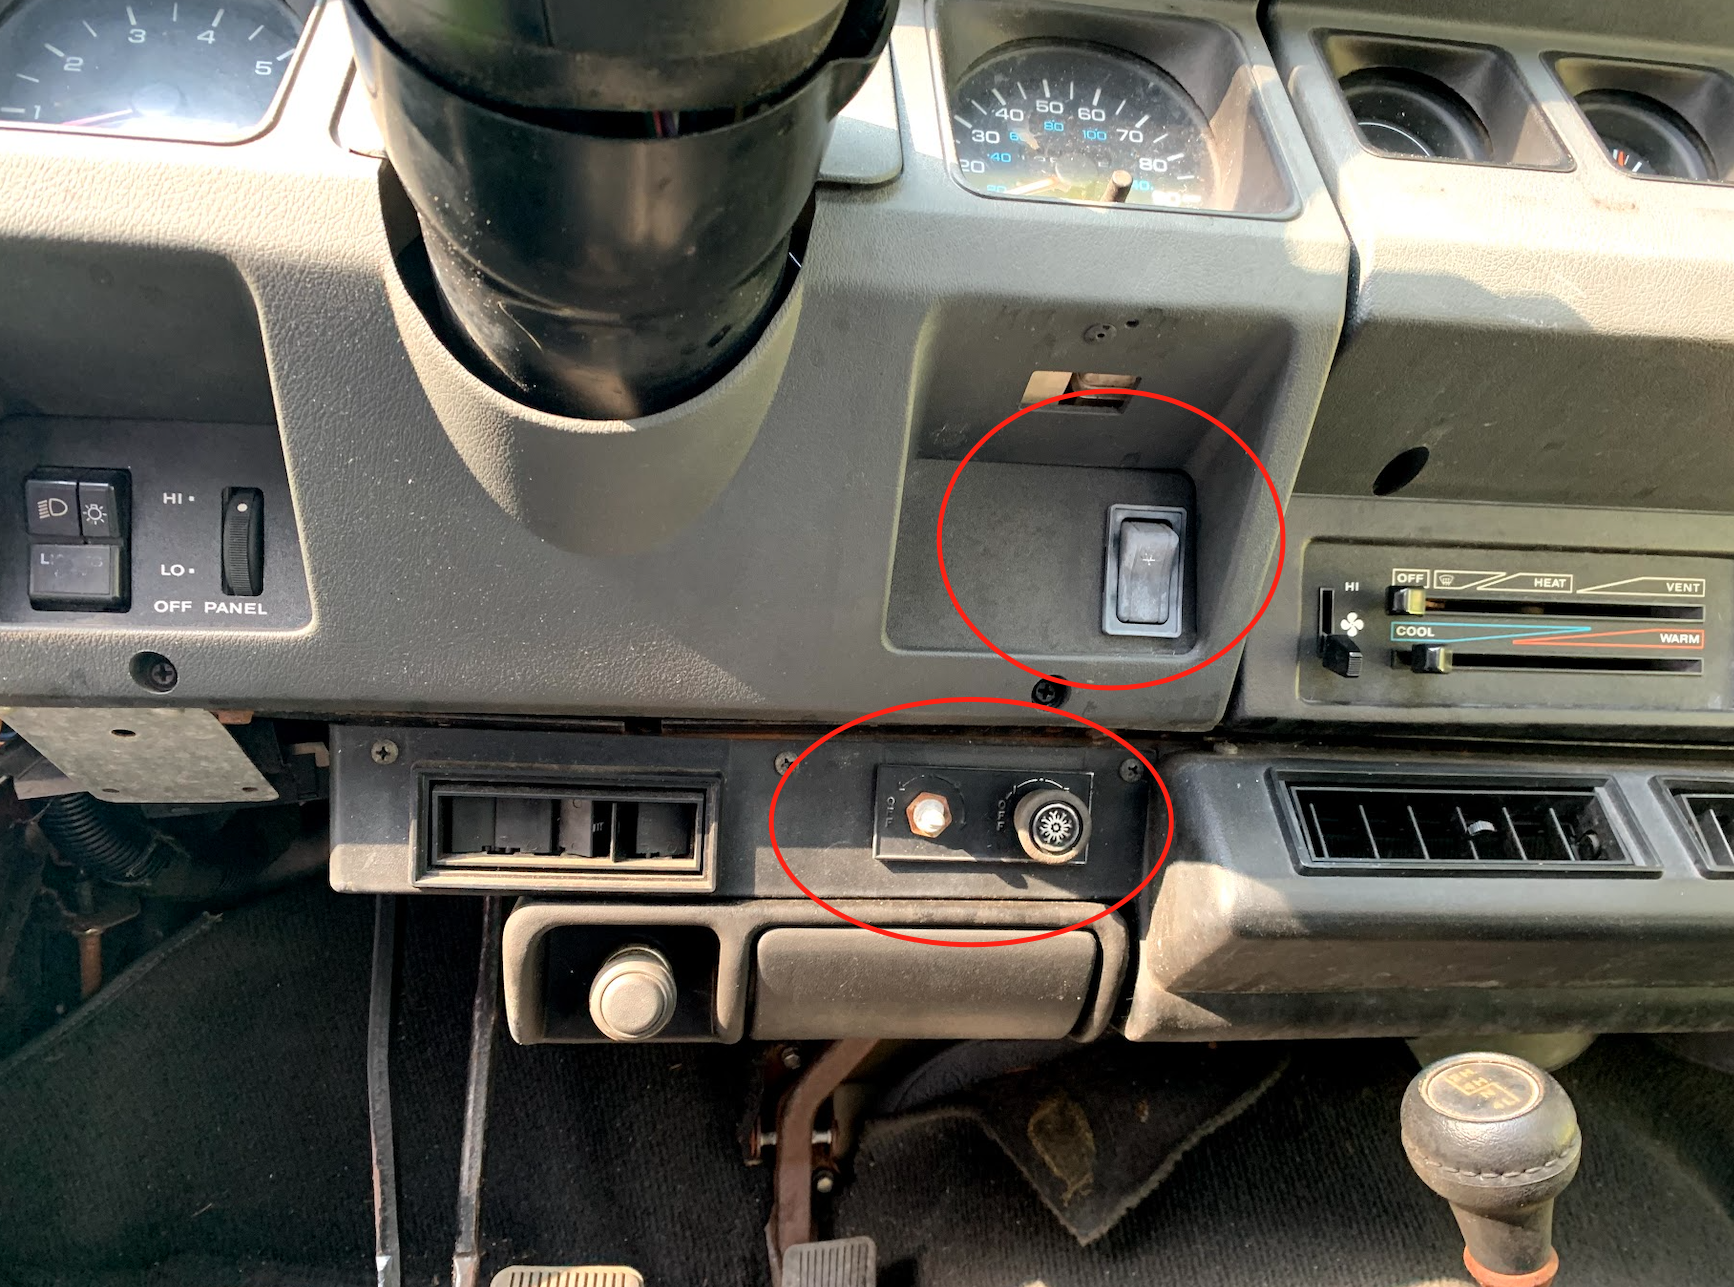 1995 YJ- What are these switches and knobs for? | Jeep Wrangler Forum